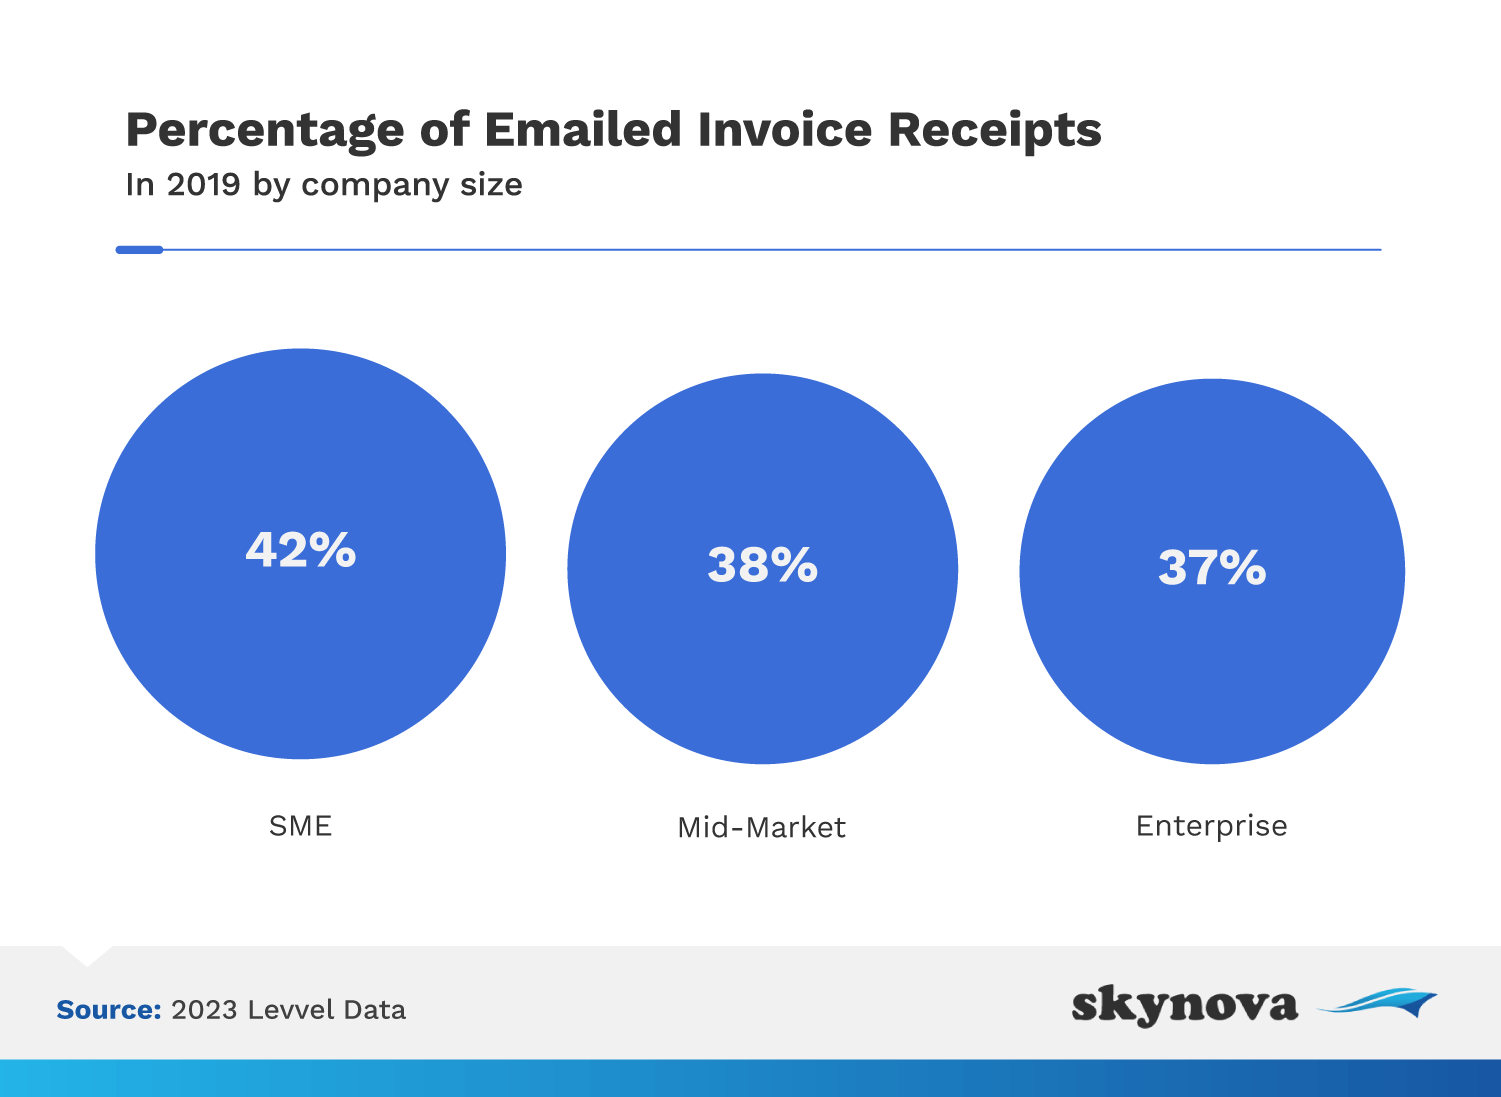 Percentage of emailed invoices